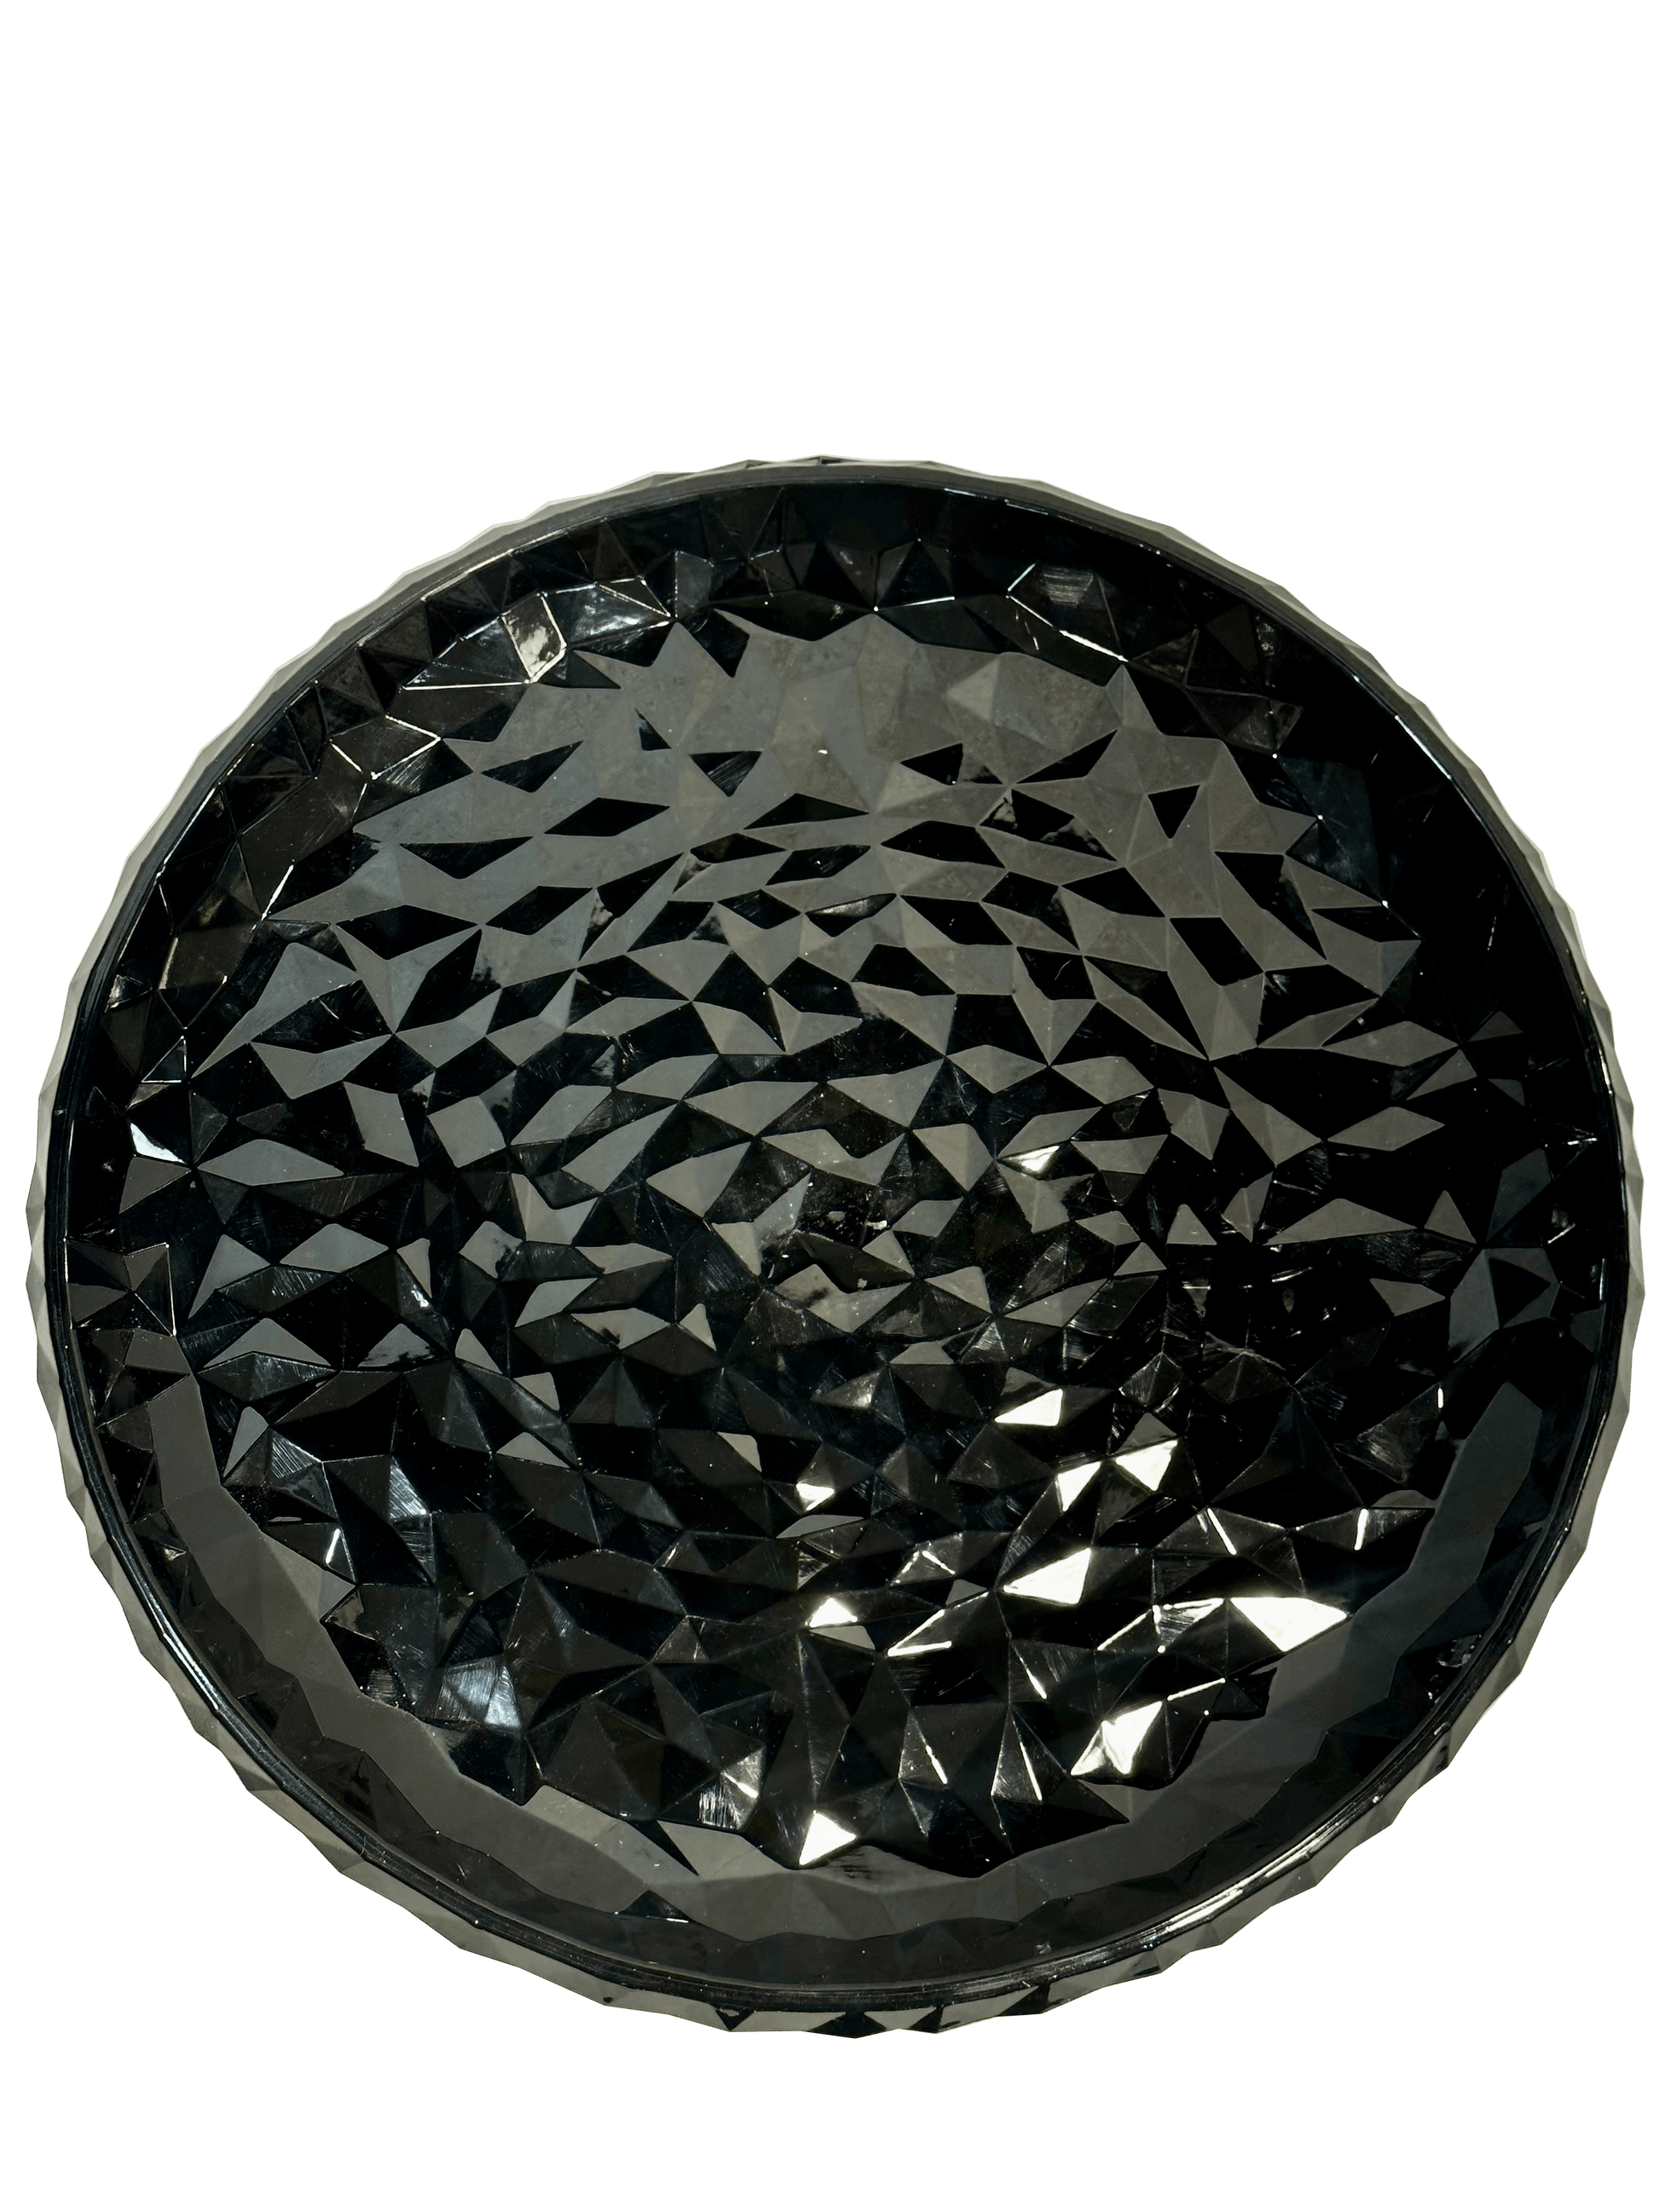 Japanese Traditional Black Plate (6 Pcs Set) - Sunset Gifts Store